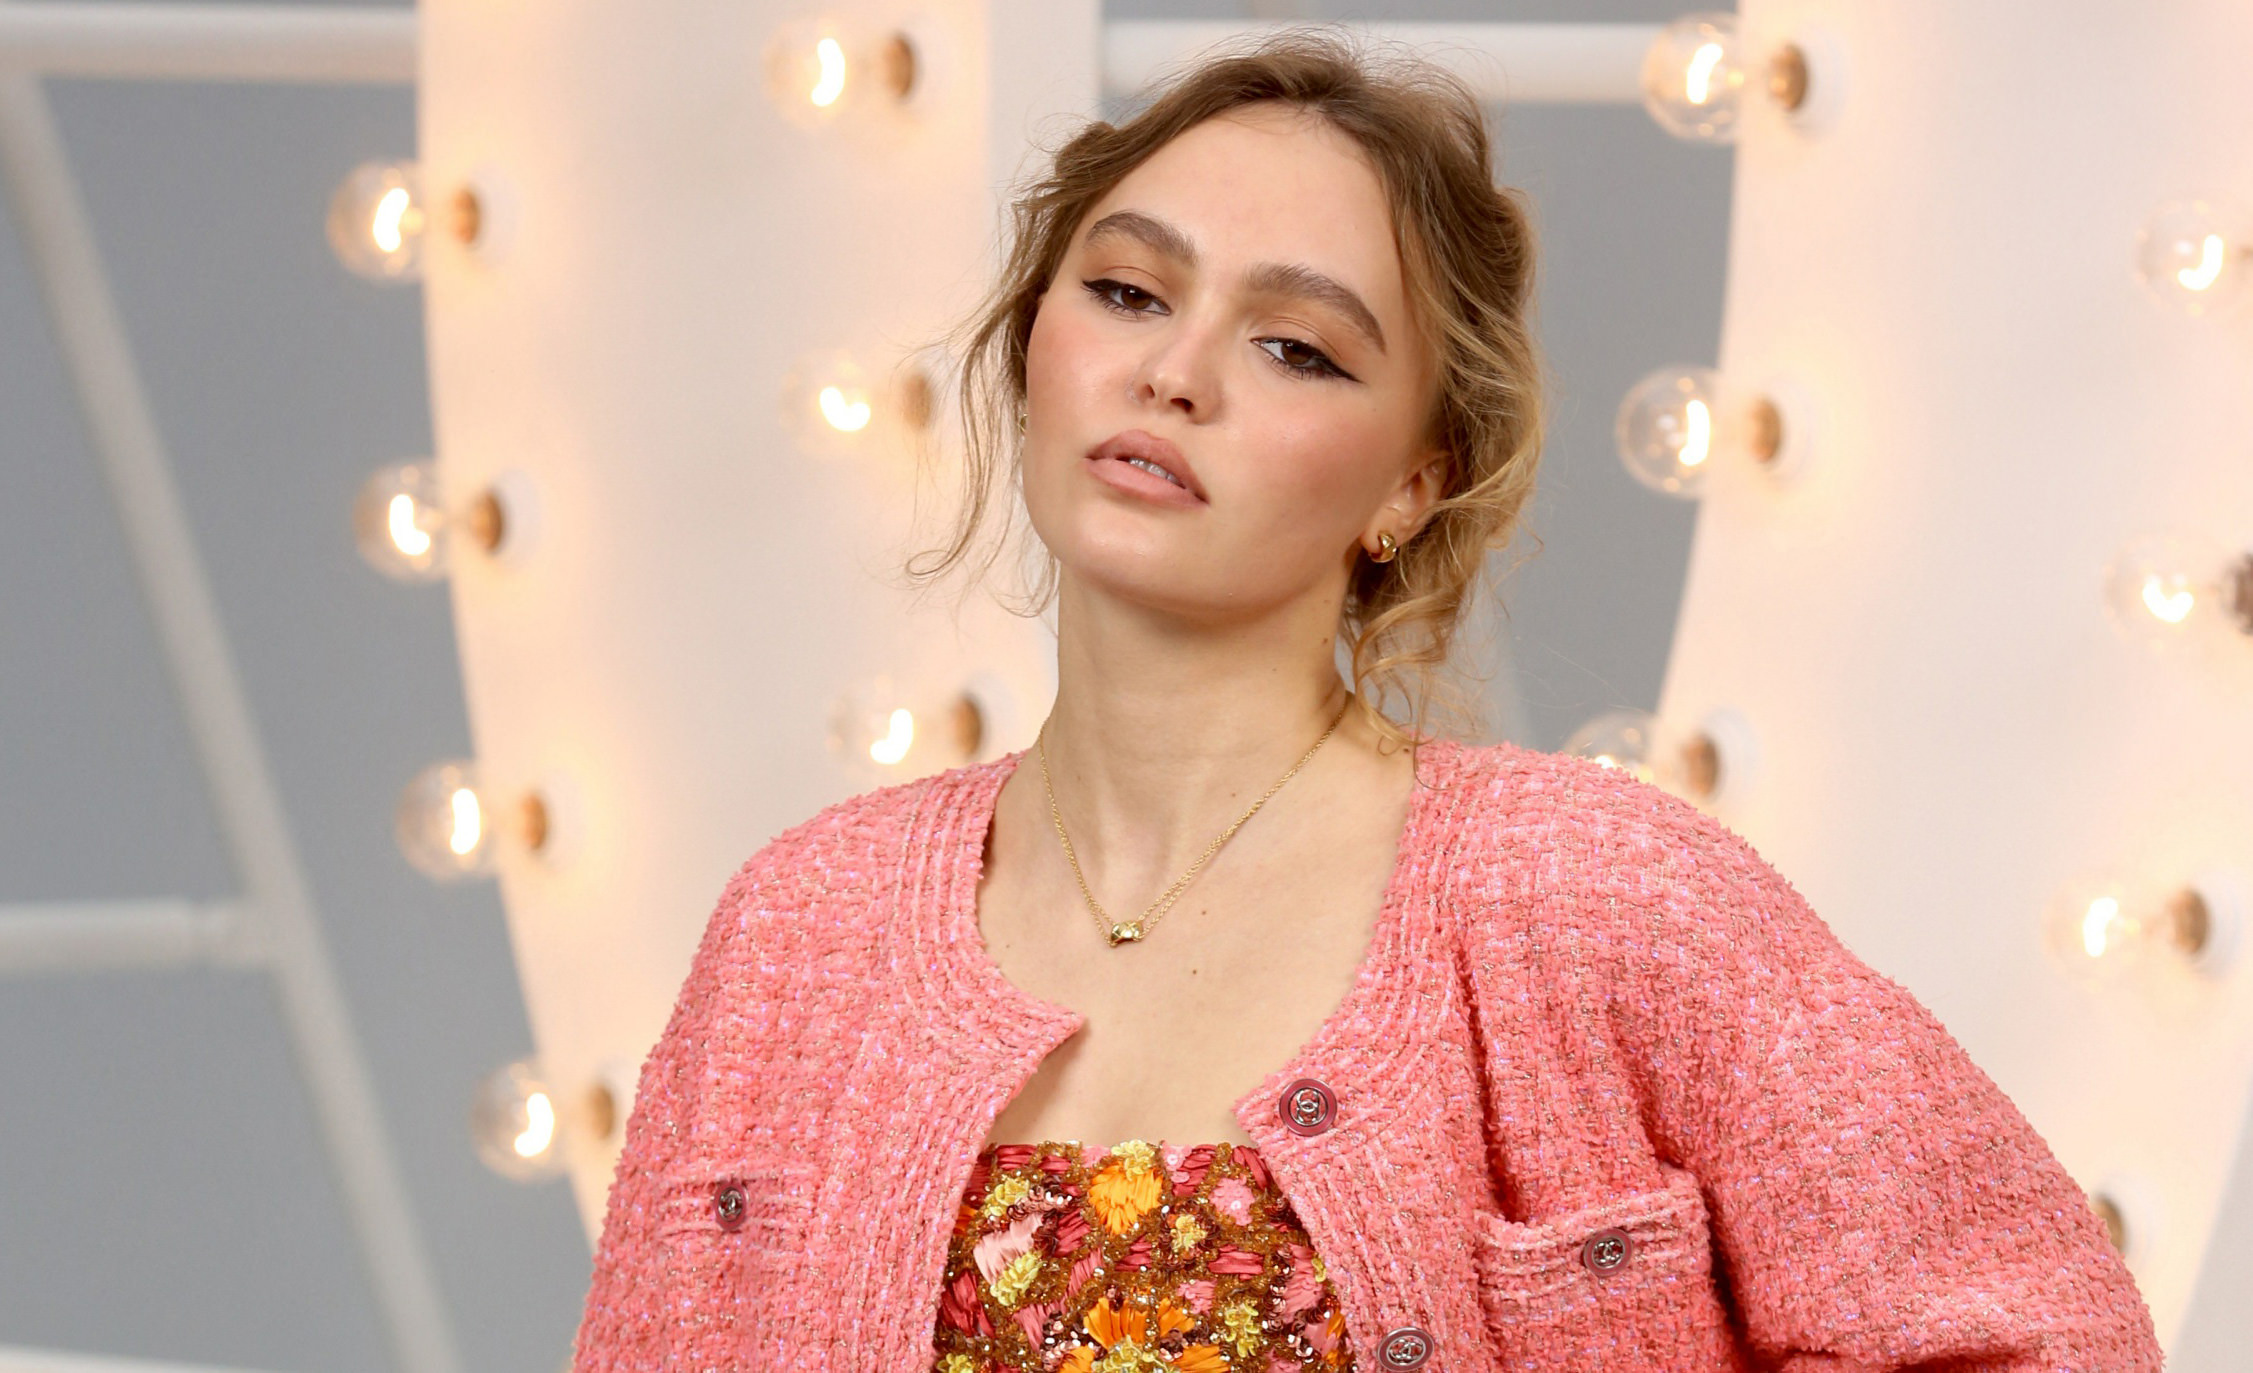 Lily-Rose Depp Is Fashion's Next Celebrity Offspring to Watch - Fashionista